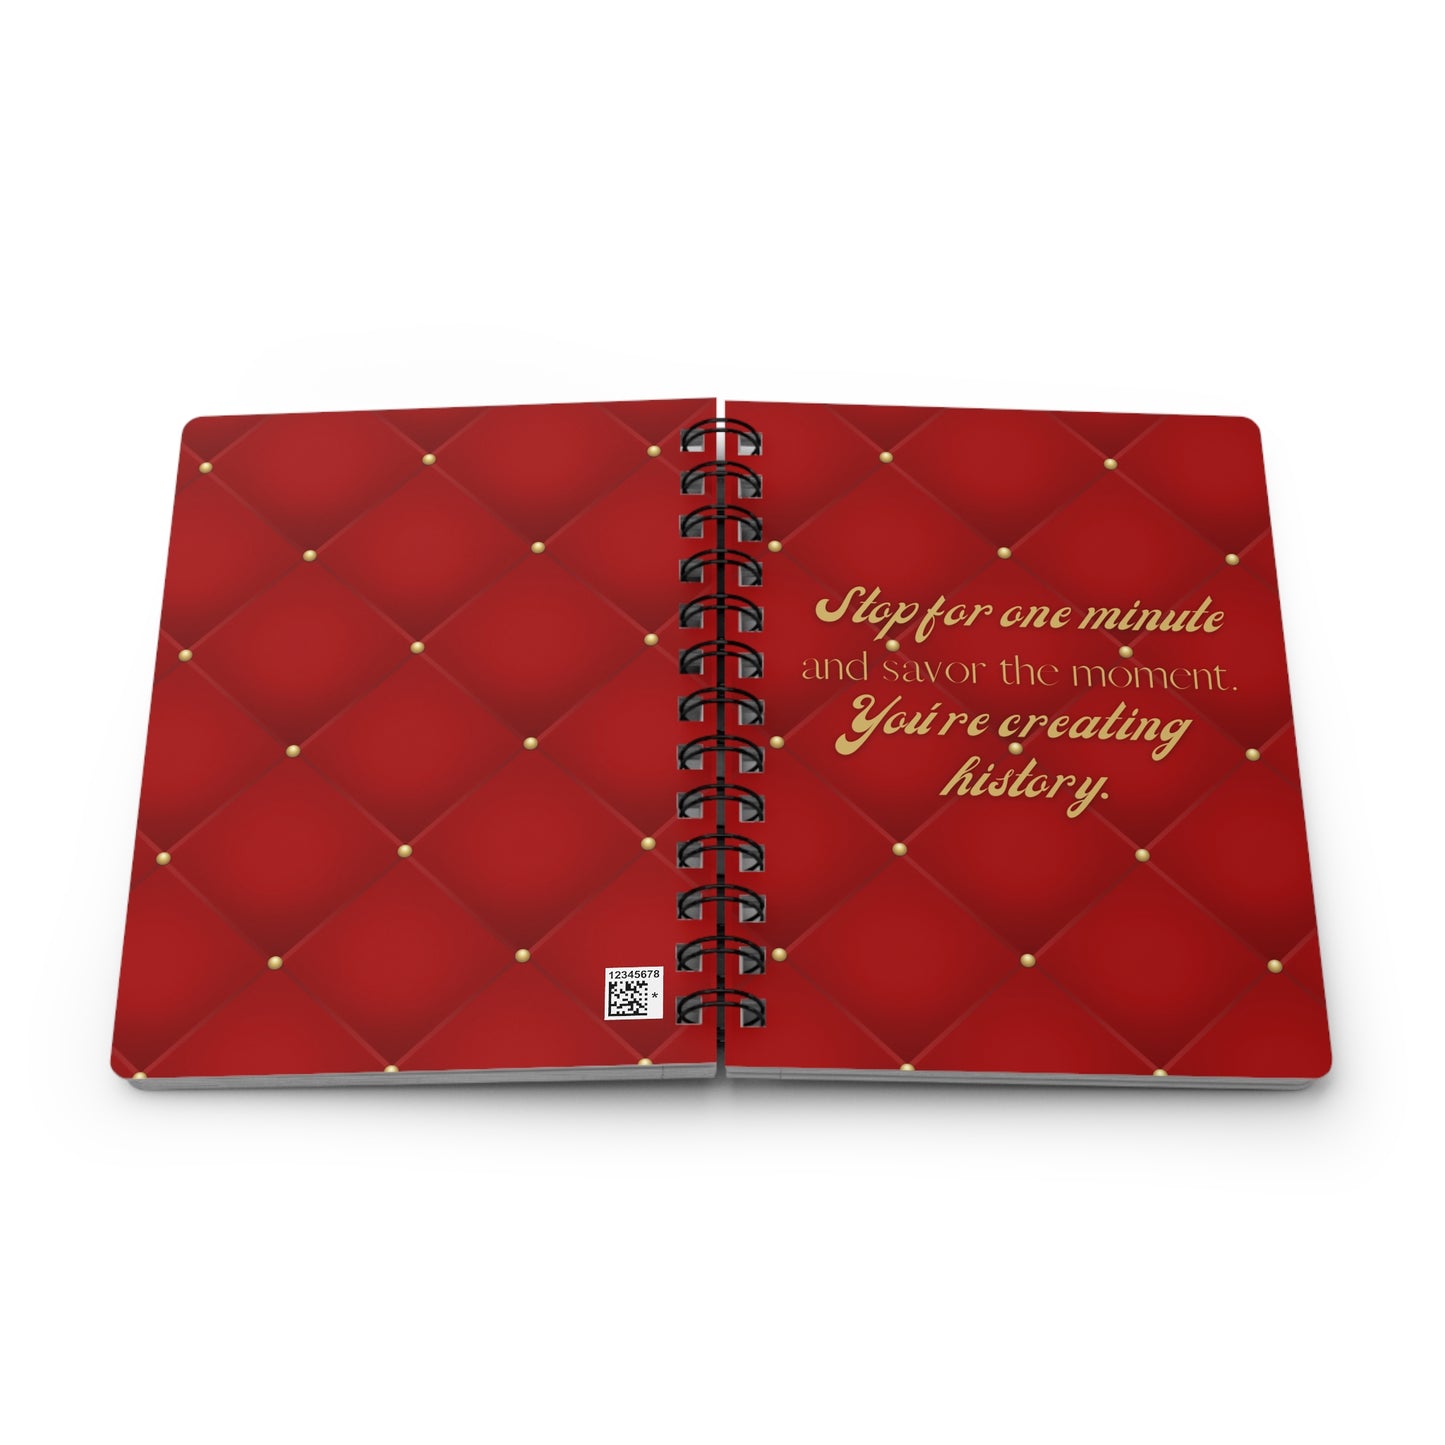 Stop for one minute Tufted Print Red and Gold Spiral Bound Journal